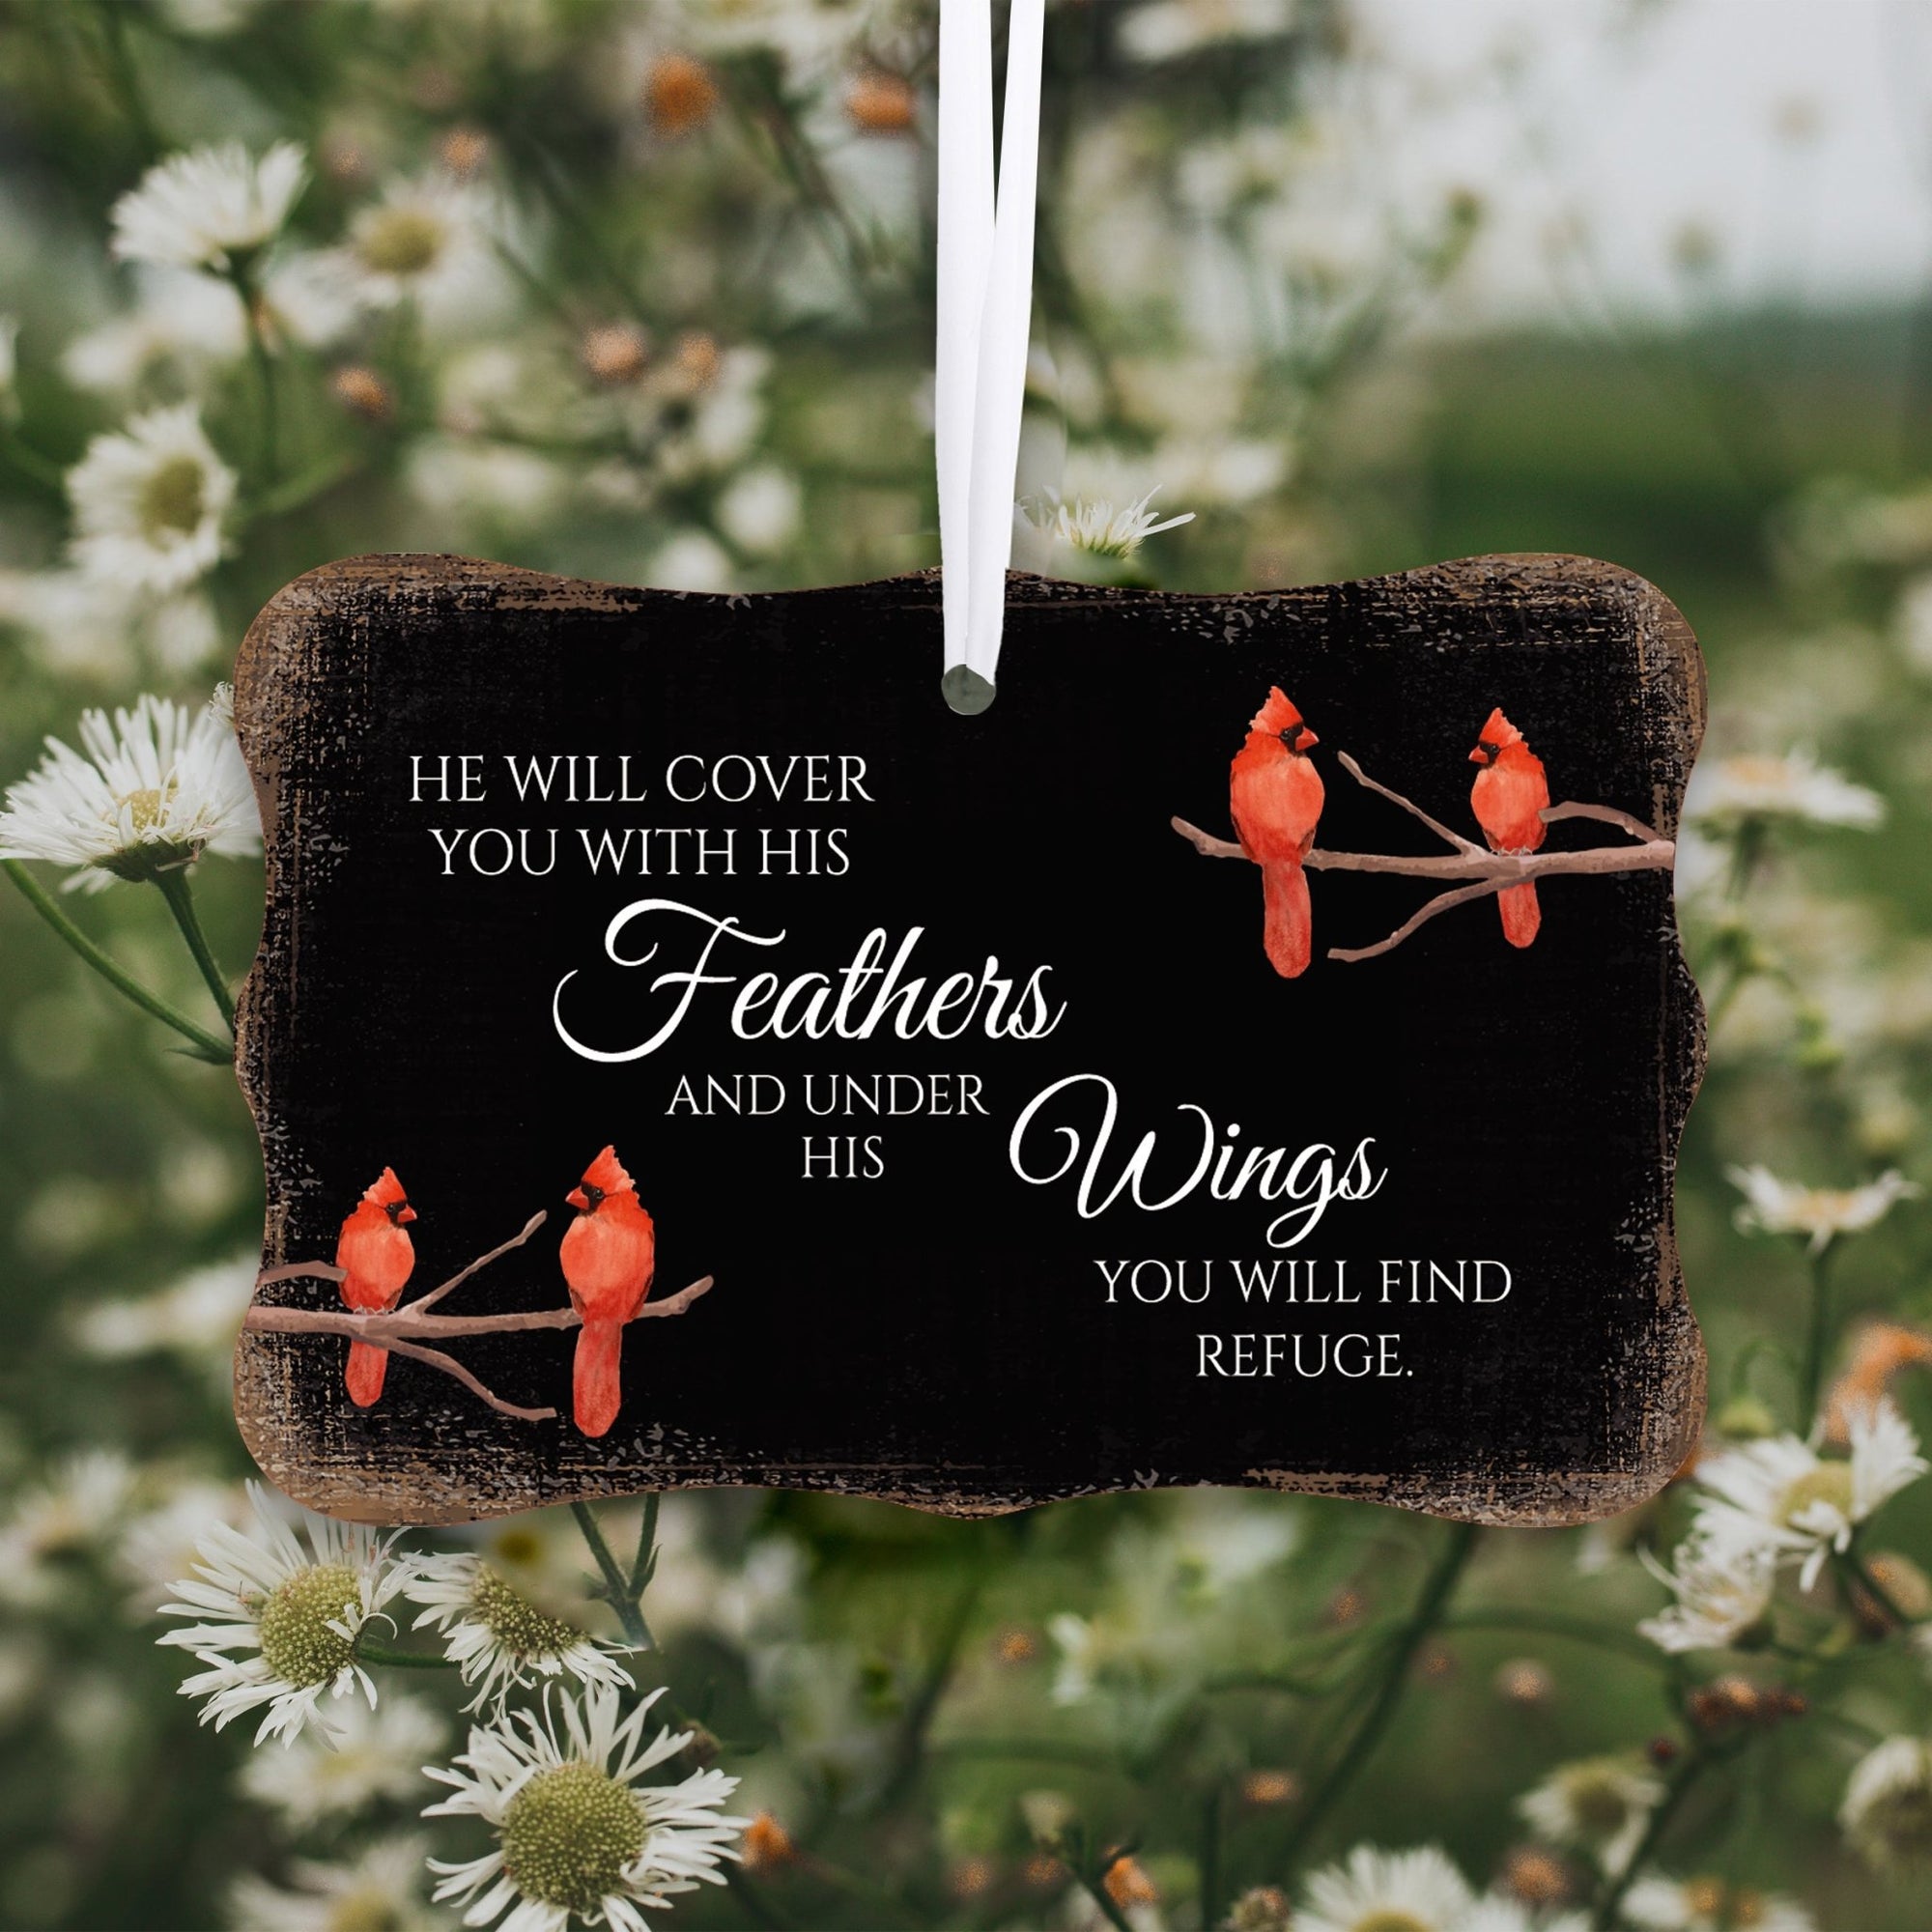 Rustic Scalloped Cardinal Wooden Ornament With Everyday Verses Gift Ideas - He Will Cover - LifeSong Milestones